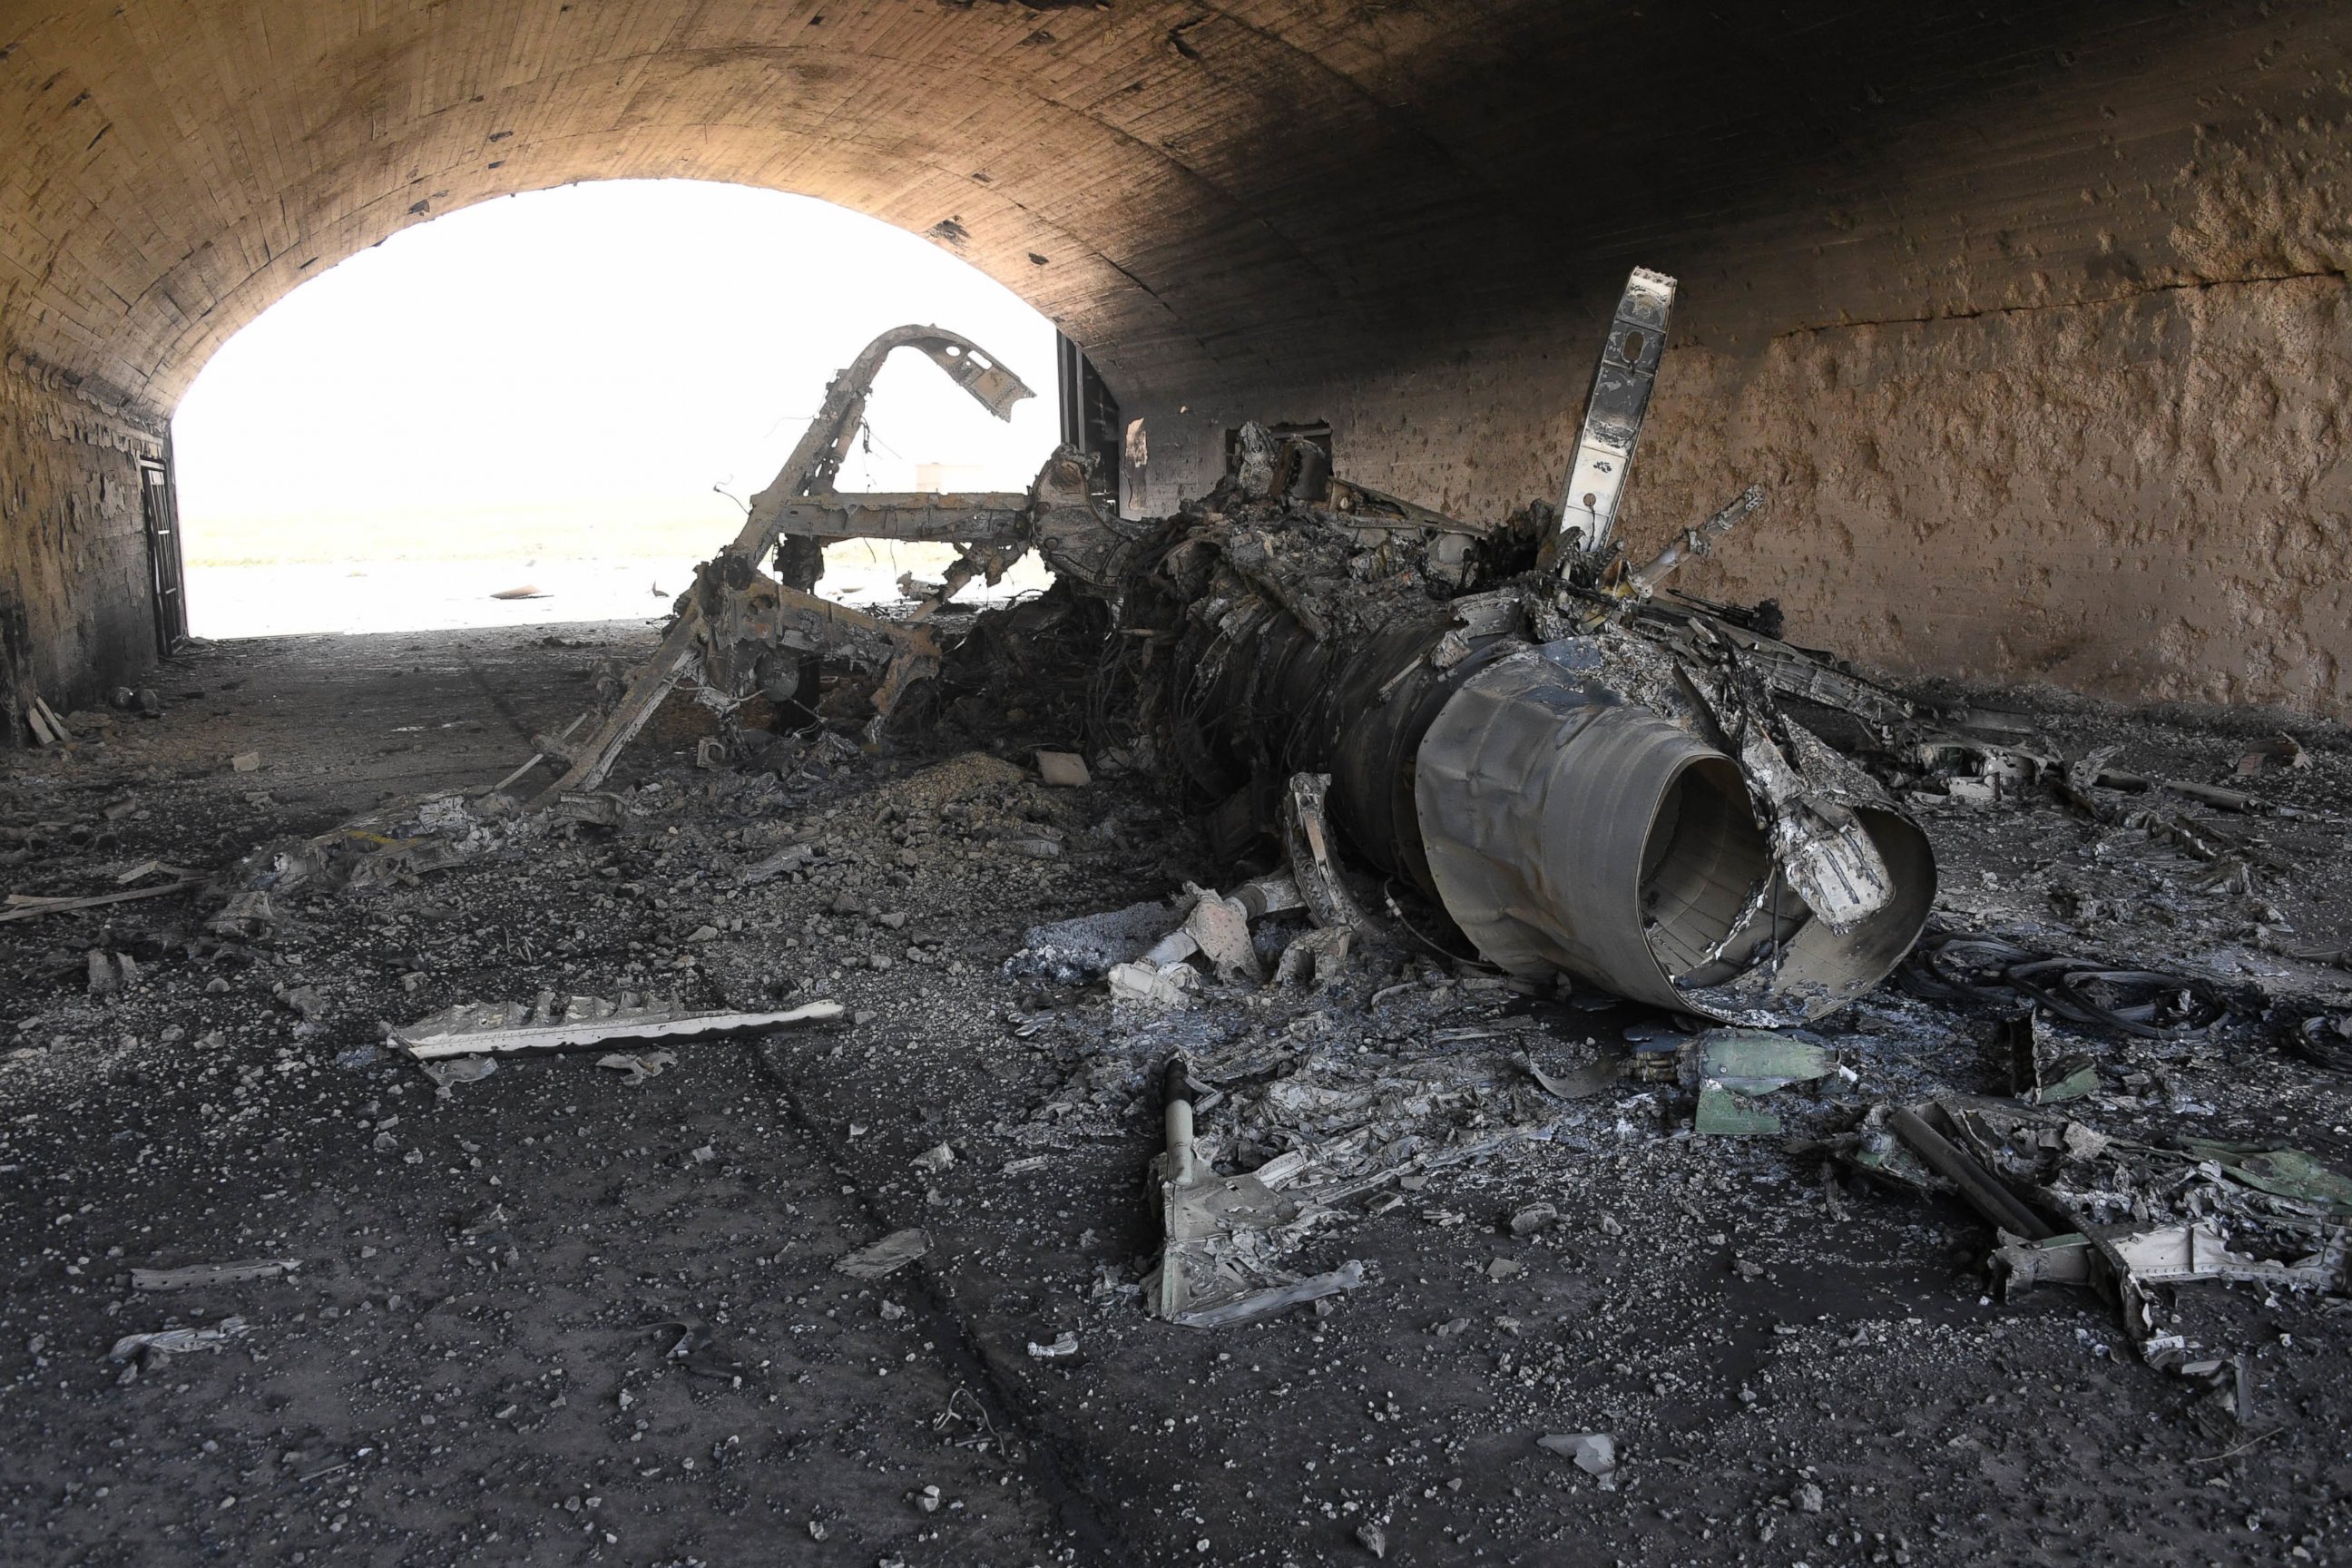 PHOTO: In a photo released by the Russian state-owned news outlet, Sputnik, the body of the remains of a plane burned following the U.S. missile attack on an air base in Syria, April 7, 2017. 